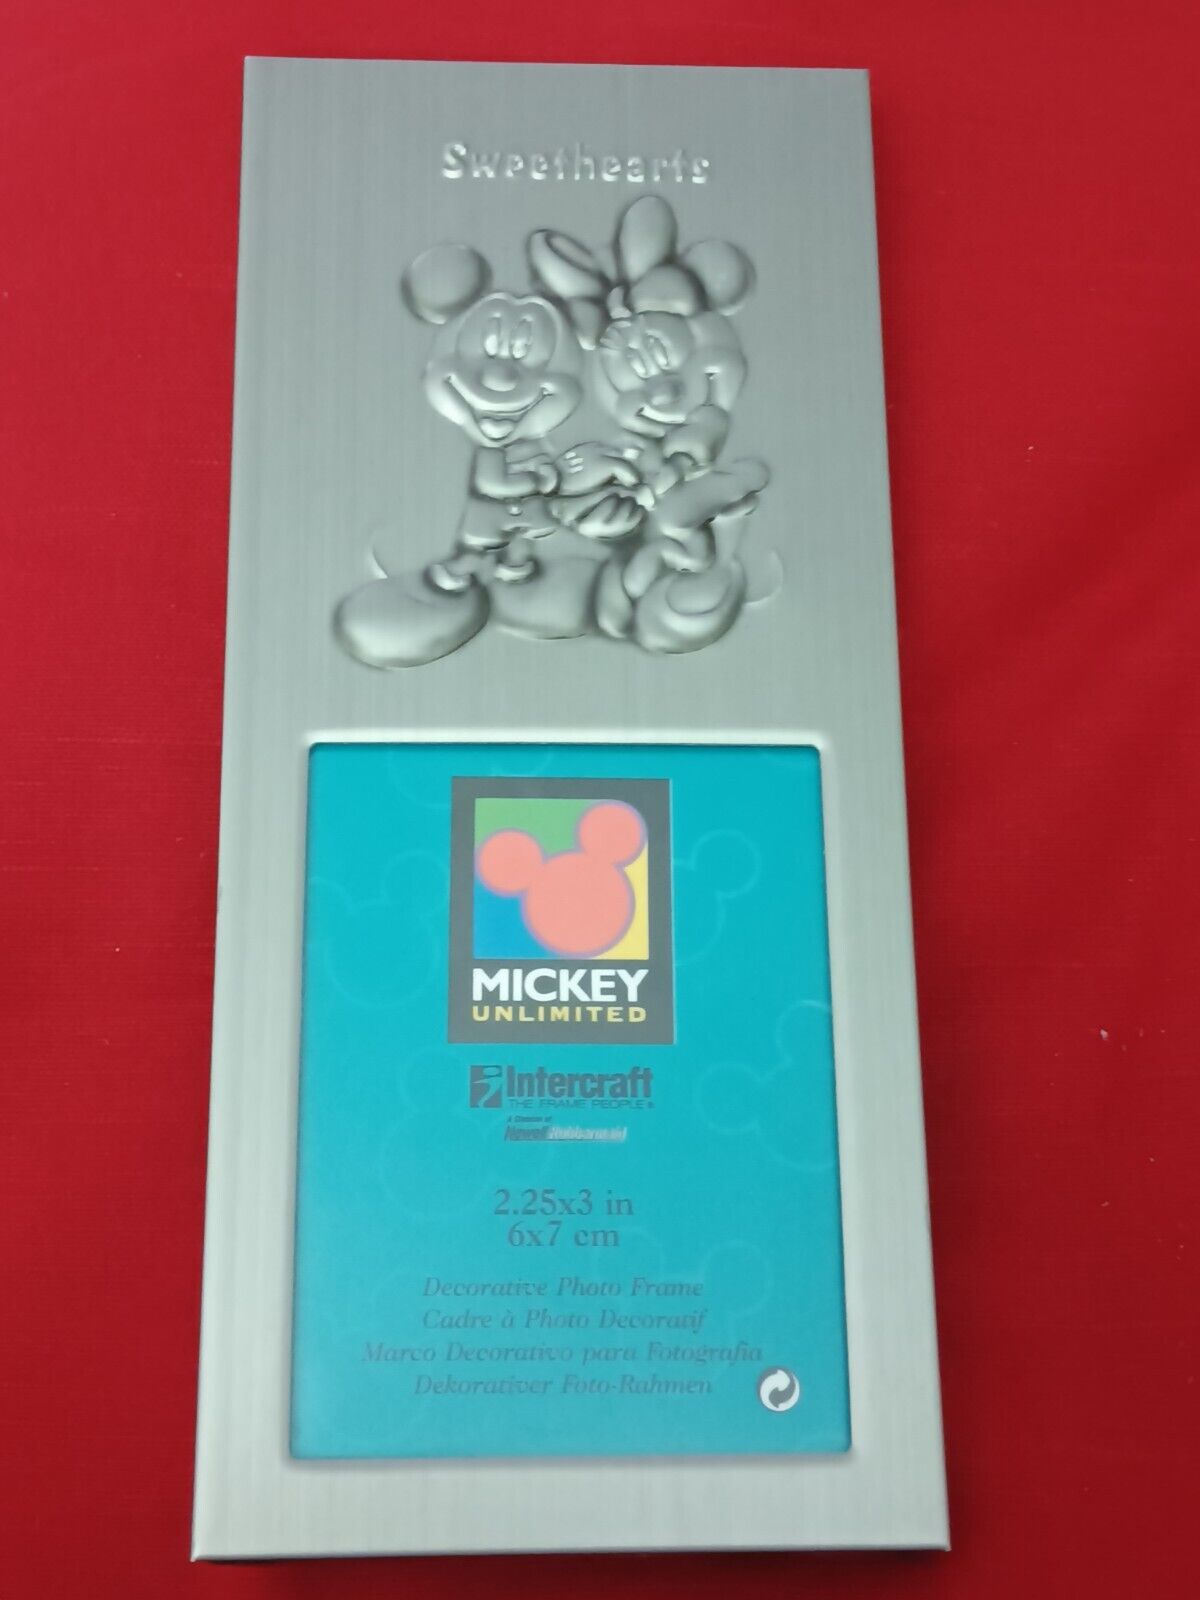 Mickey Mouse Unlimited Sweethearts Photo Frame Metal Intercraft b103 3x7 Frame 